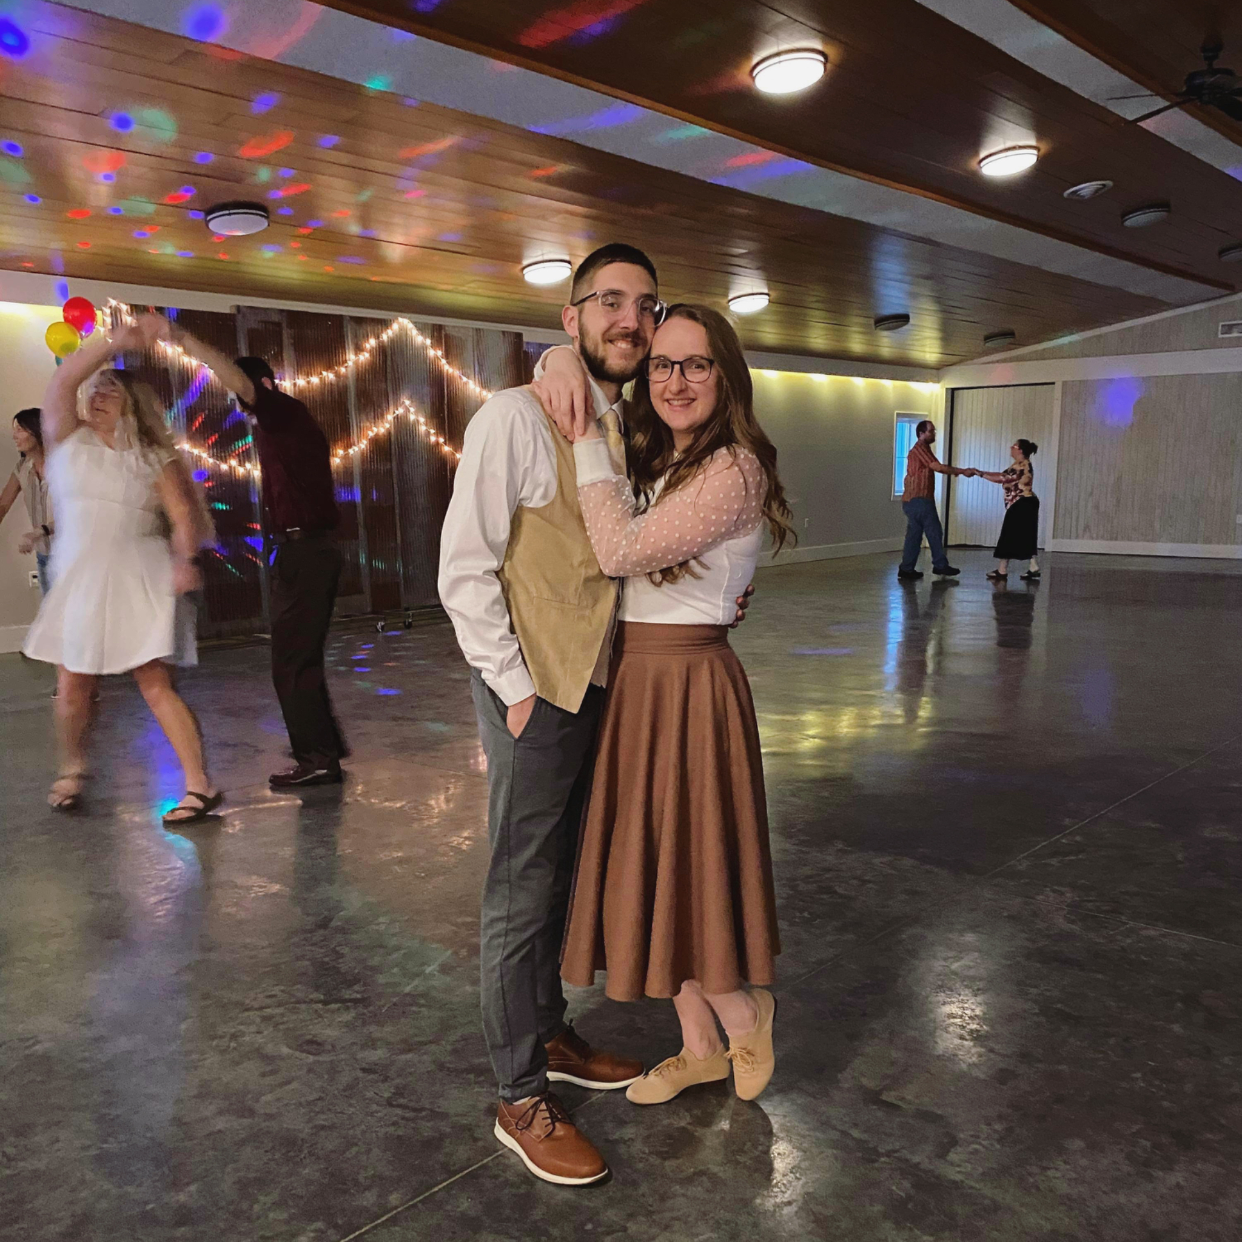 At a local swing dancing event we hosted!